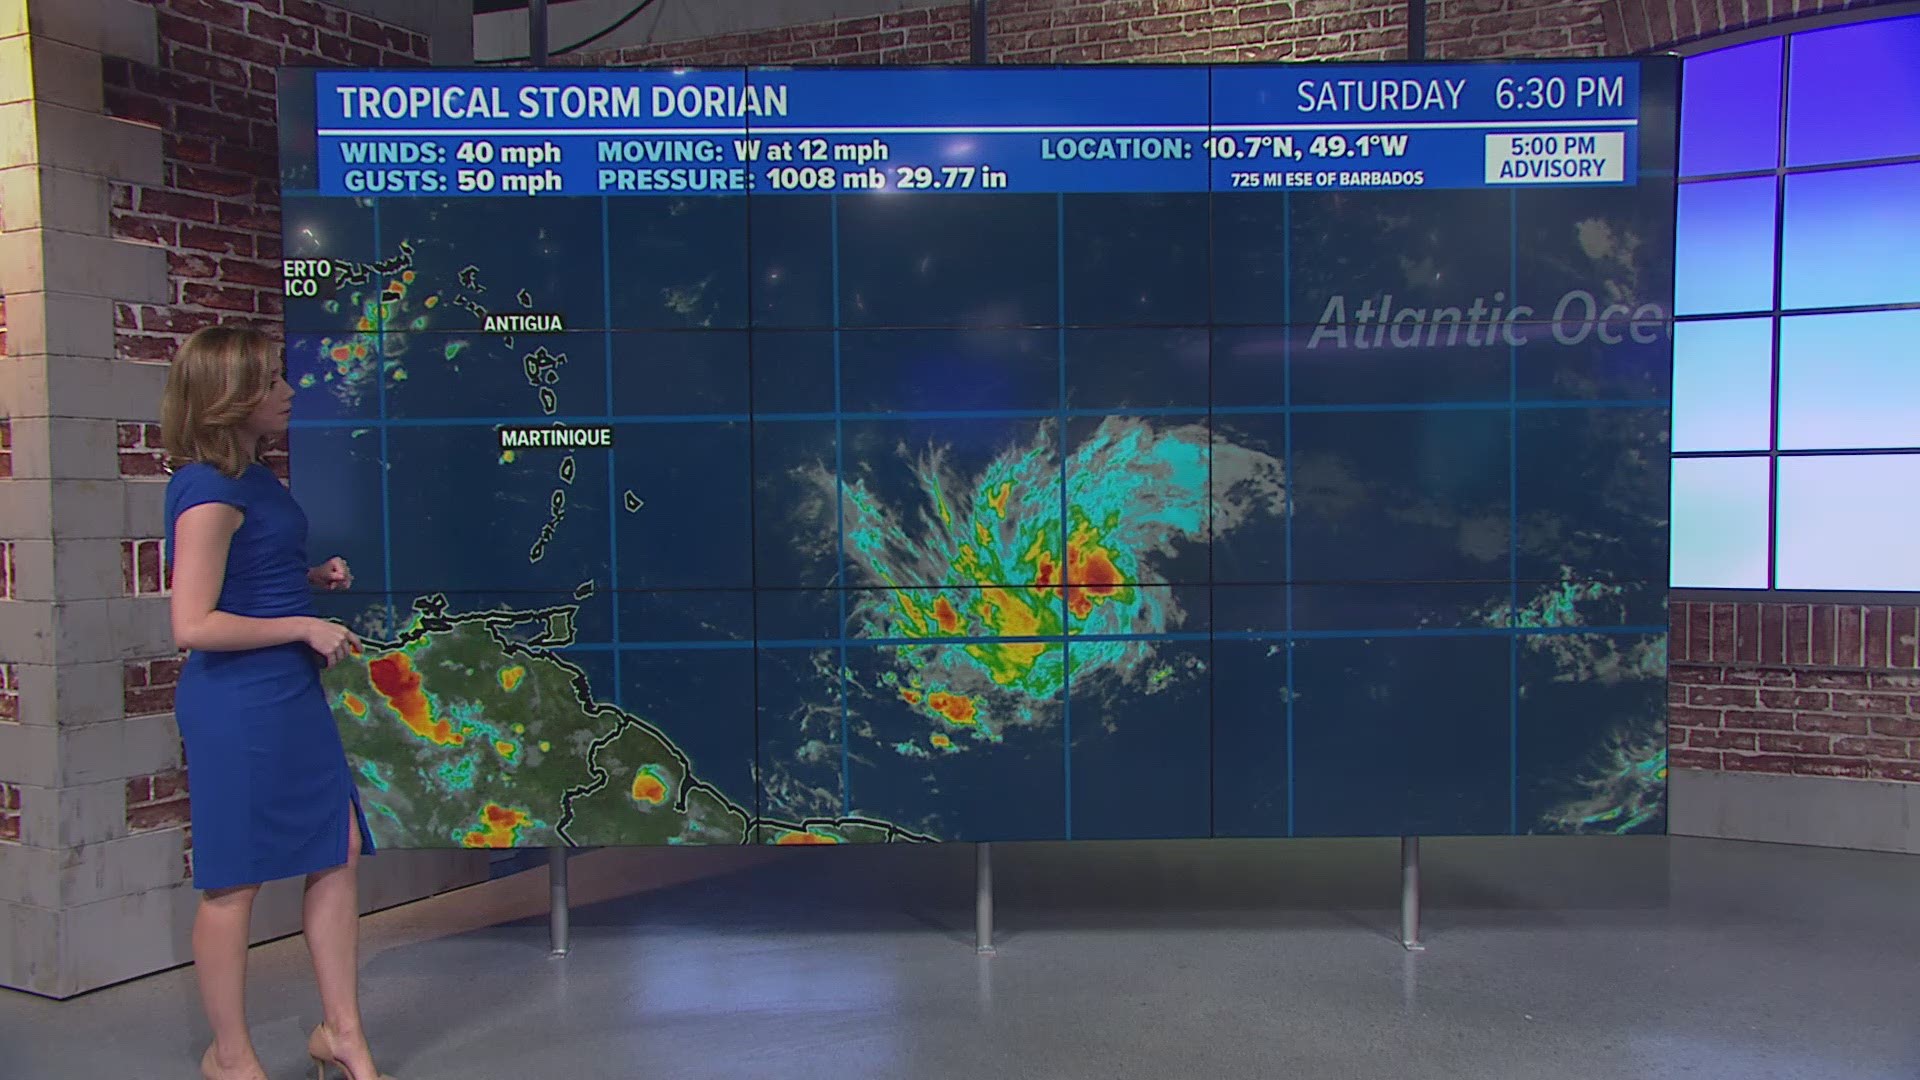 Tropical Storm Dorian formed Saturday evening. Environmental conditions will support continued strengthening. It is forecasted to become a hurricane after it passes over the Antilles and nears Puerto Rico by mid week.